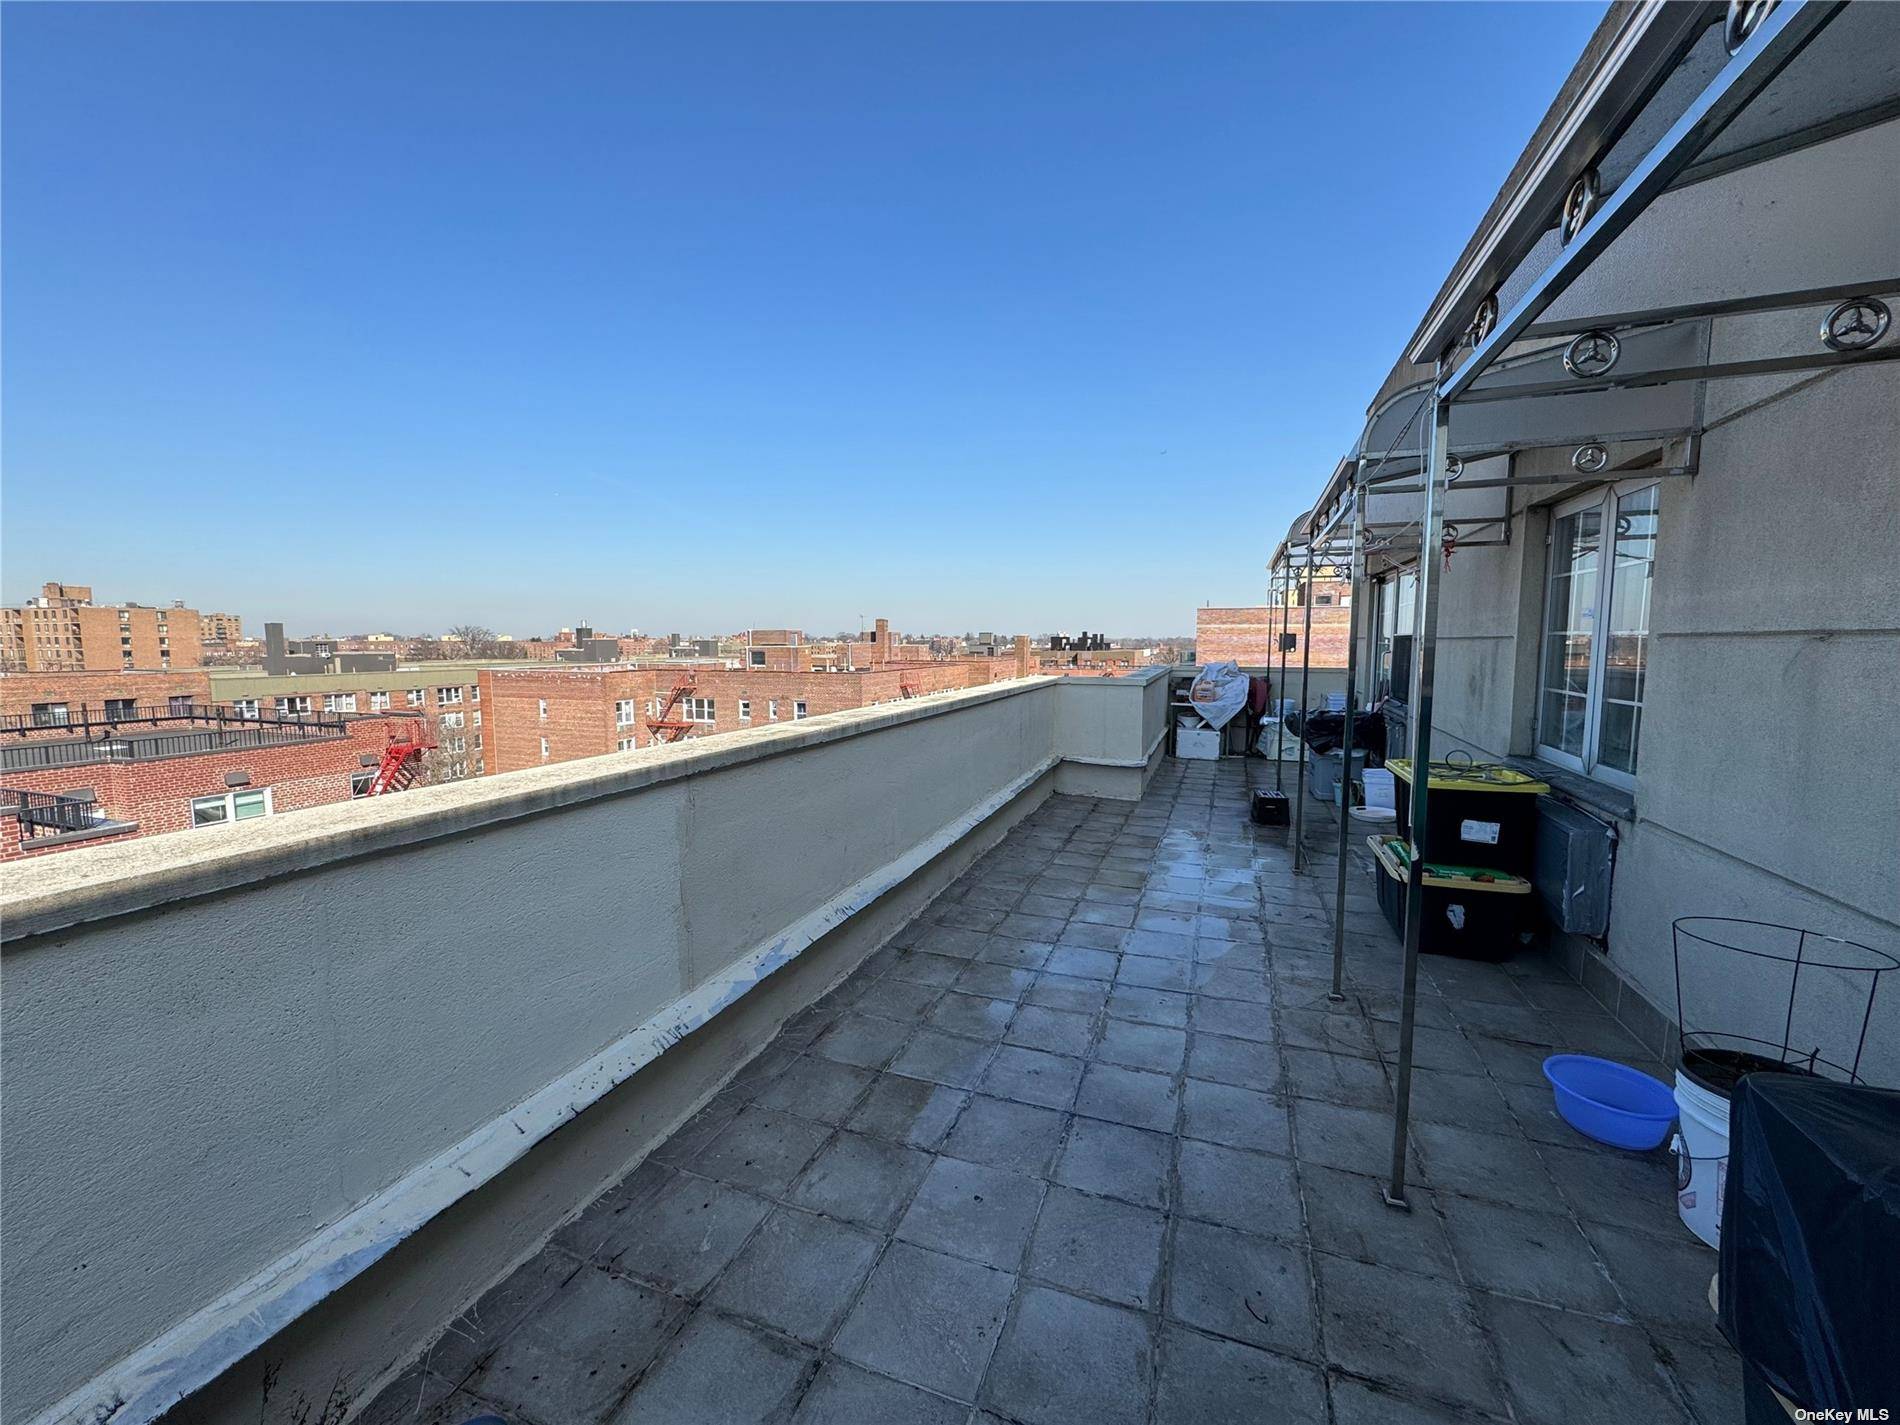 Very Sunny Boutique Condo Penthouse Top 7th Floor features LR, Dining Area, Modern Kit w Stainless Steel Appliances, 2 Bdrms, 2 Full Baths PLUS Large Balcony Terrace Addt 250 Sq ...